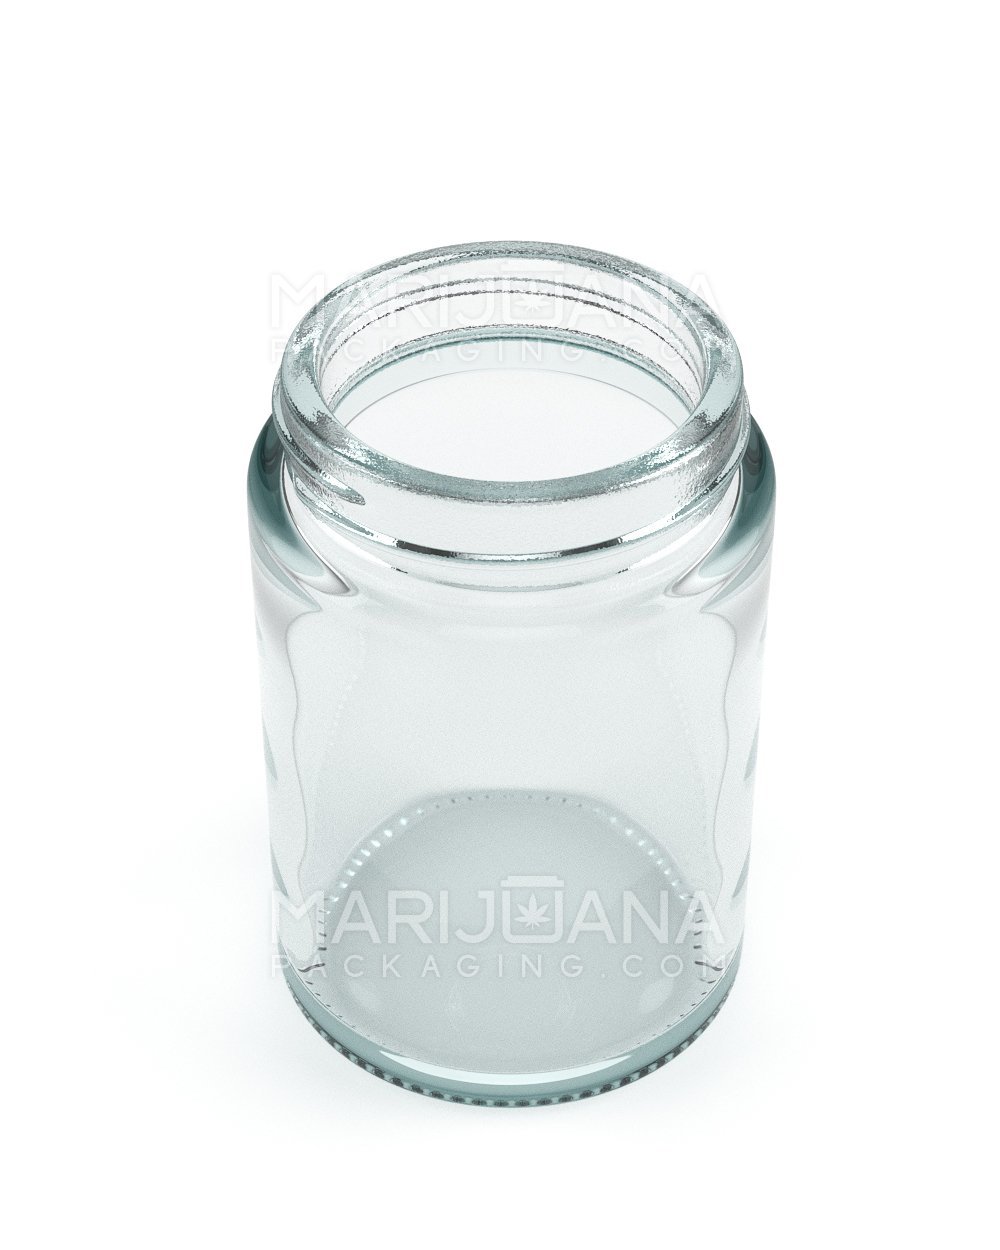 Straight Sided Clear Glass Jars | 50mm - 5oz - 100 Count - 2